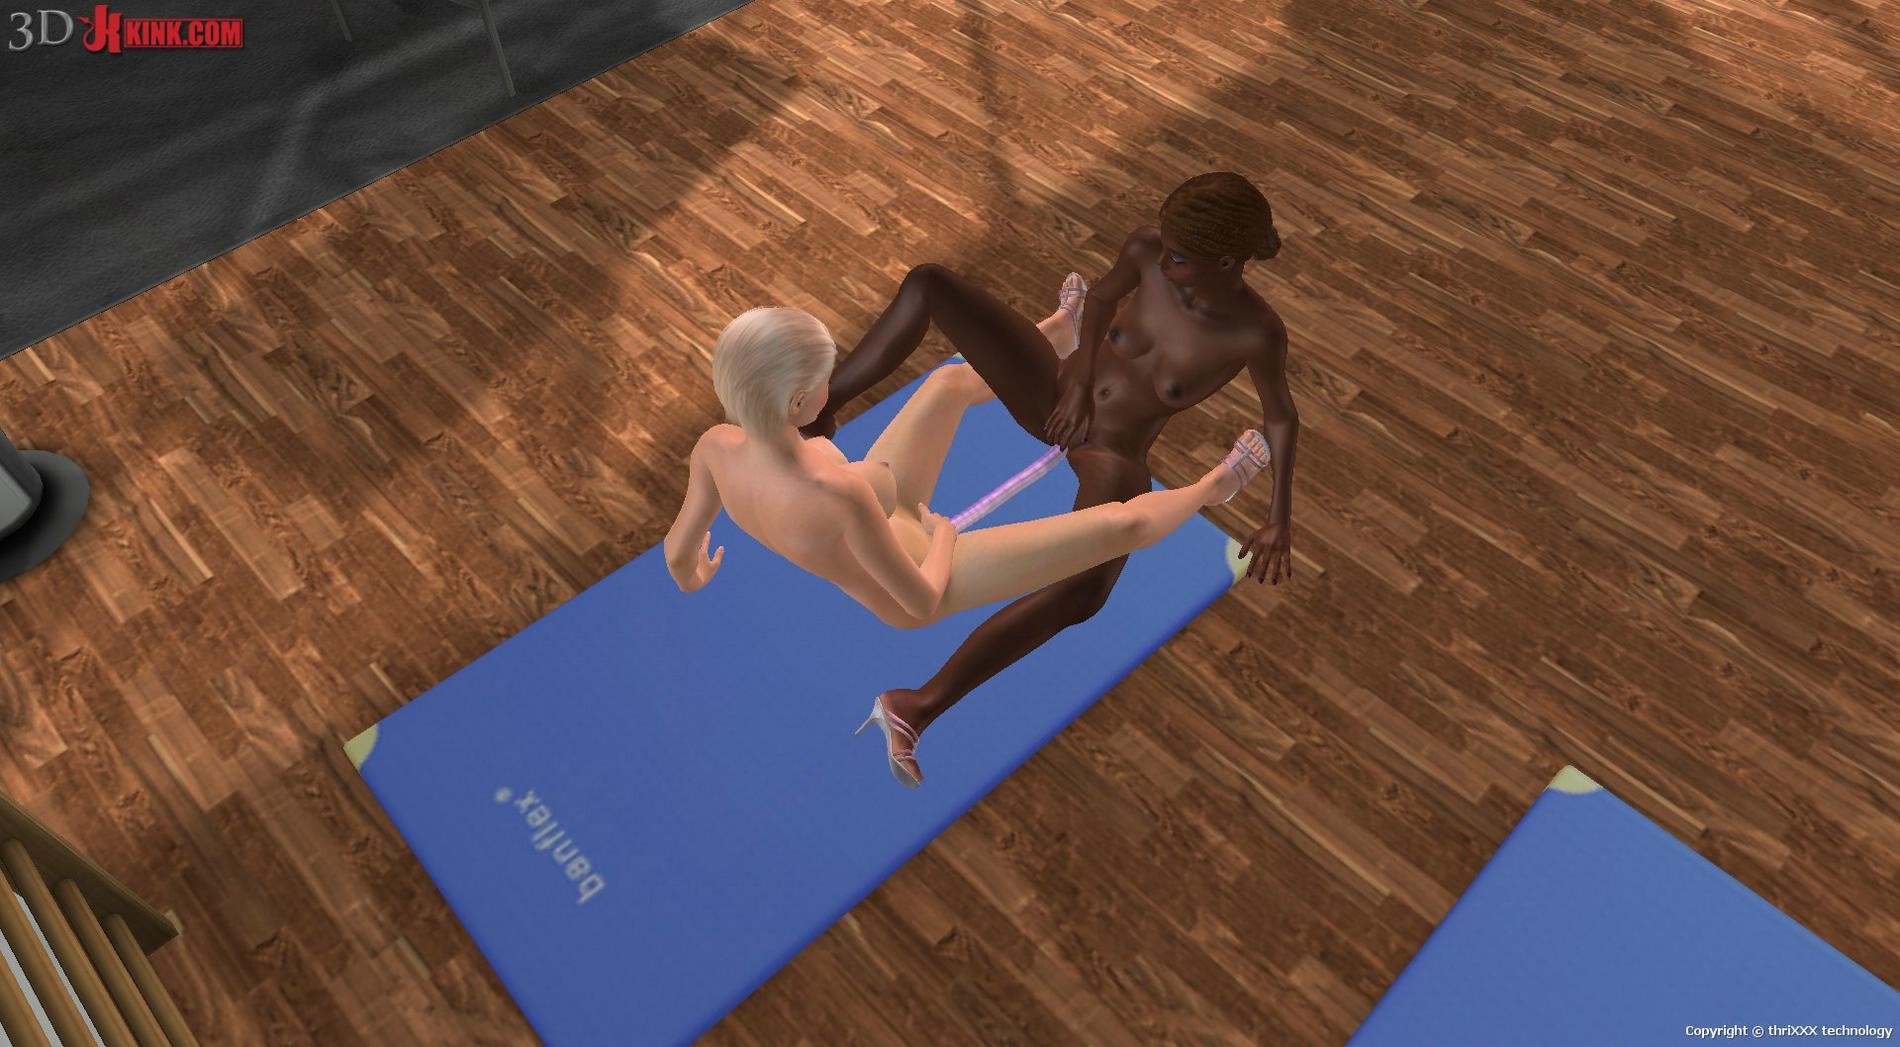 Interracial lesbian sex action created in interactive 3D game #69357209